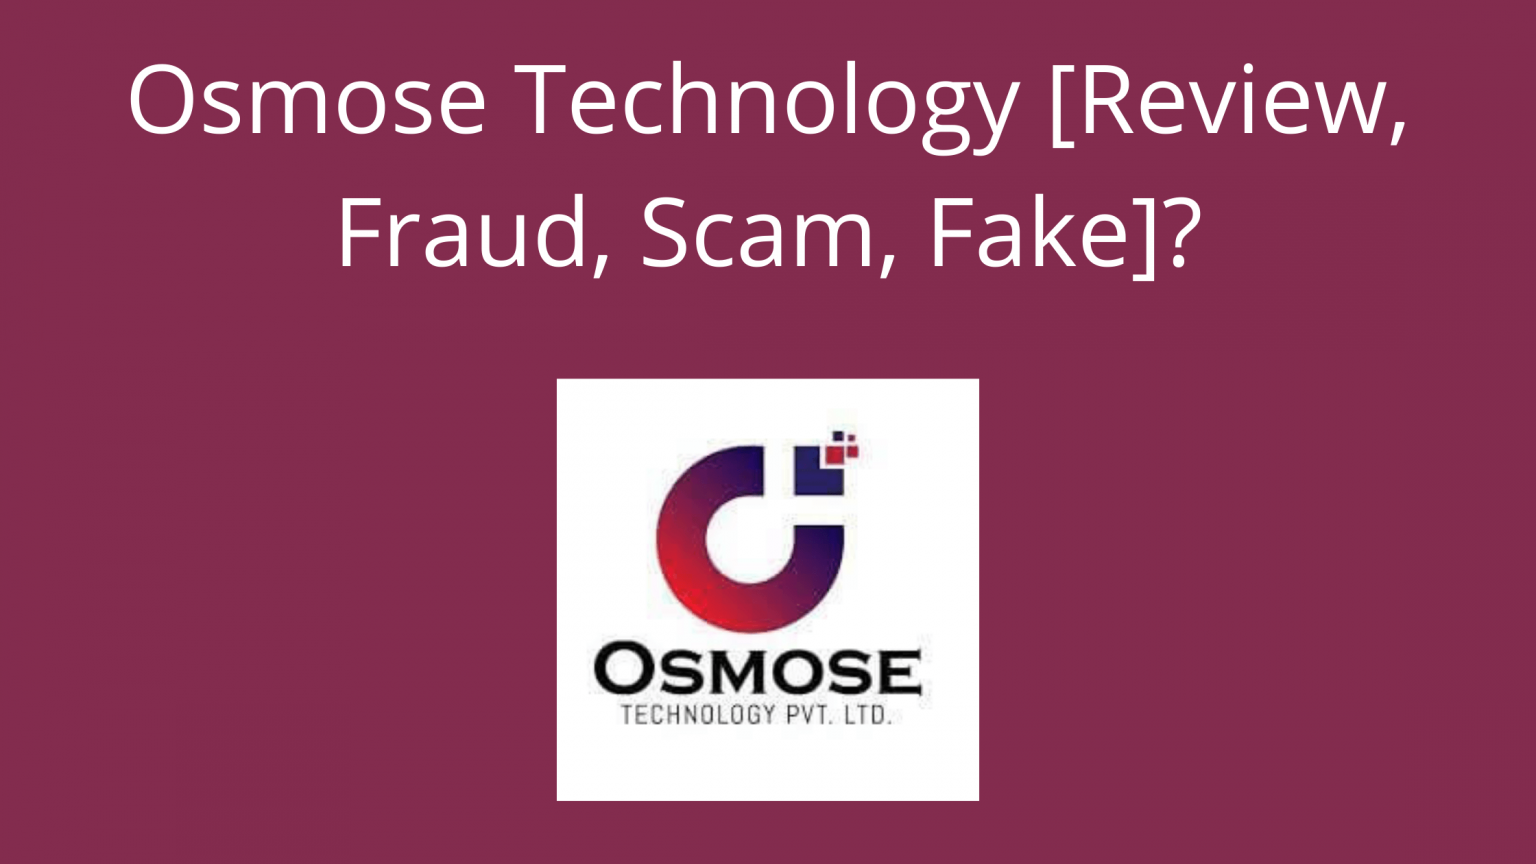 What is Osmose Technology Pvt Ltd in India